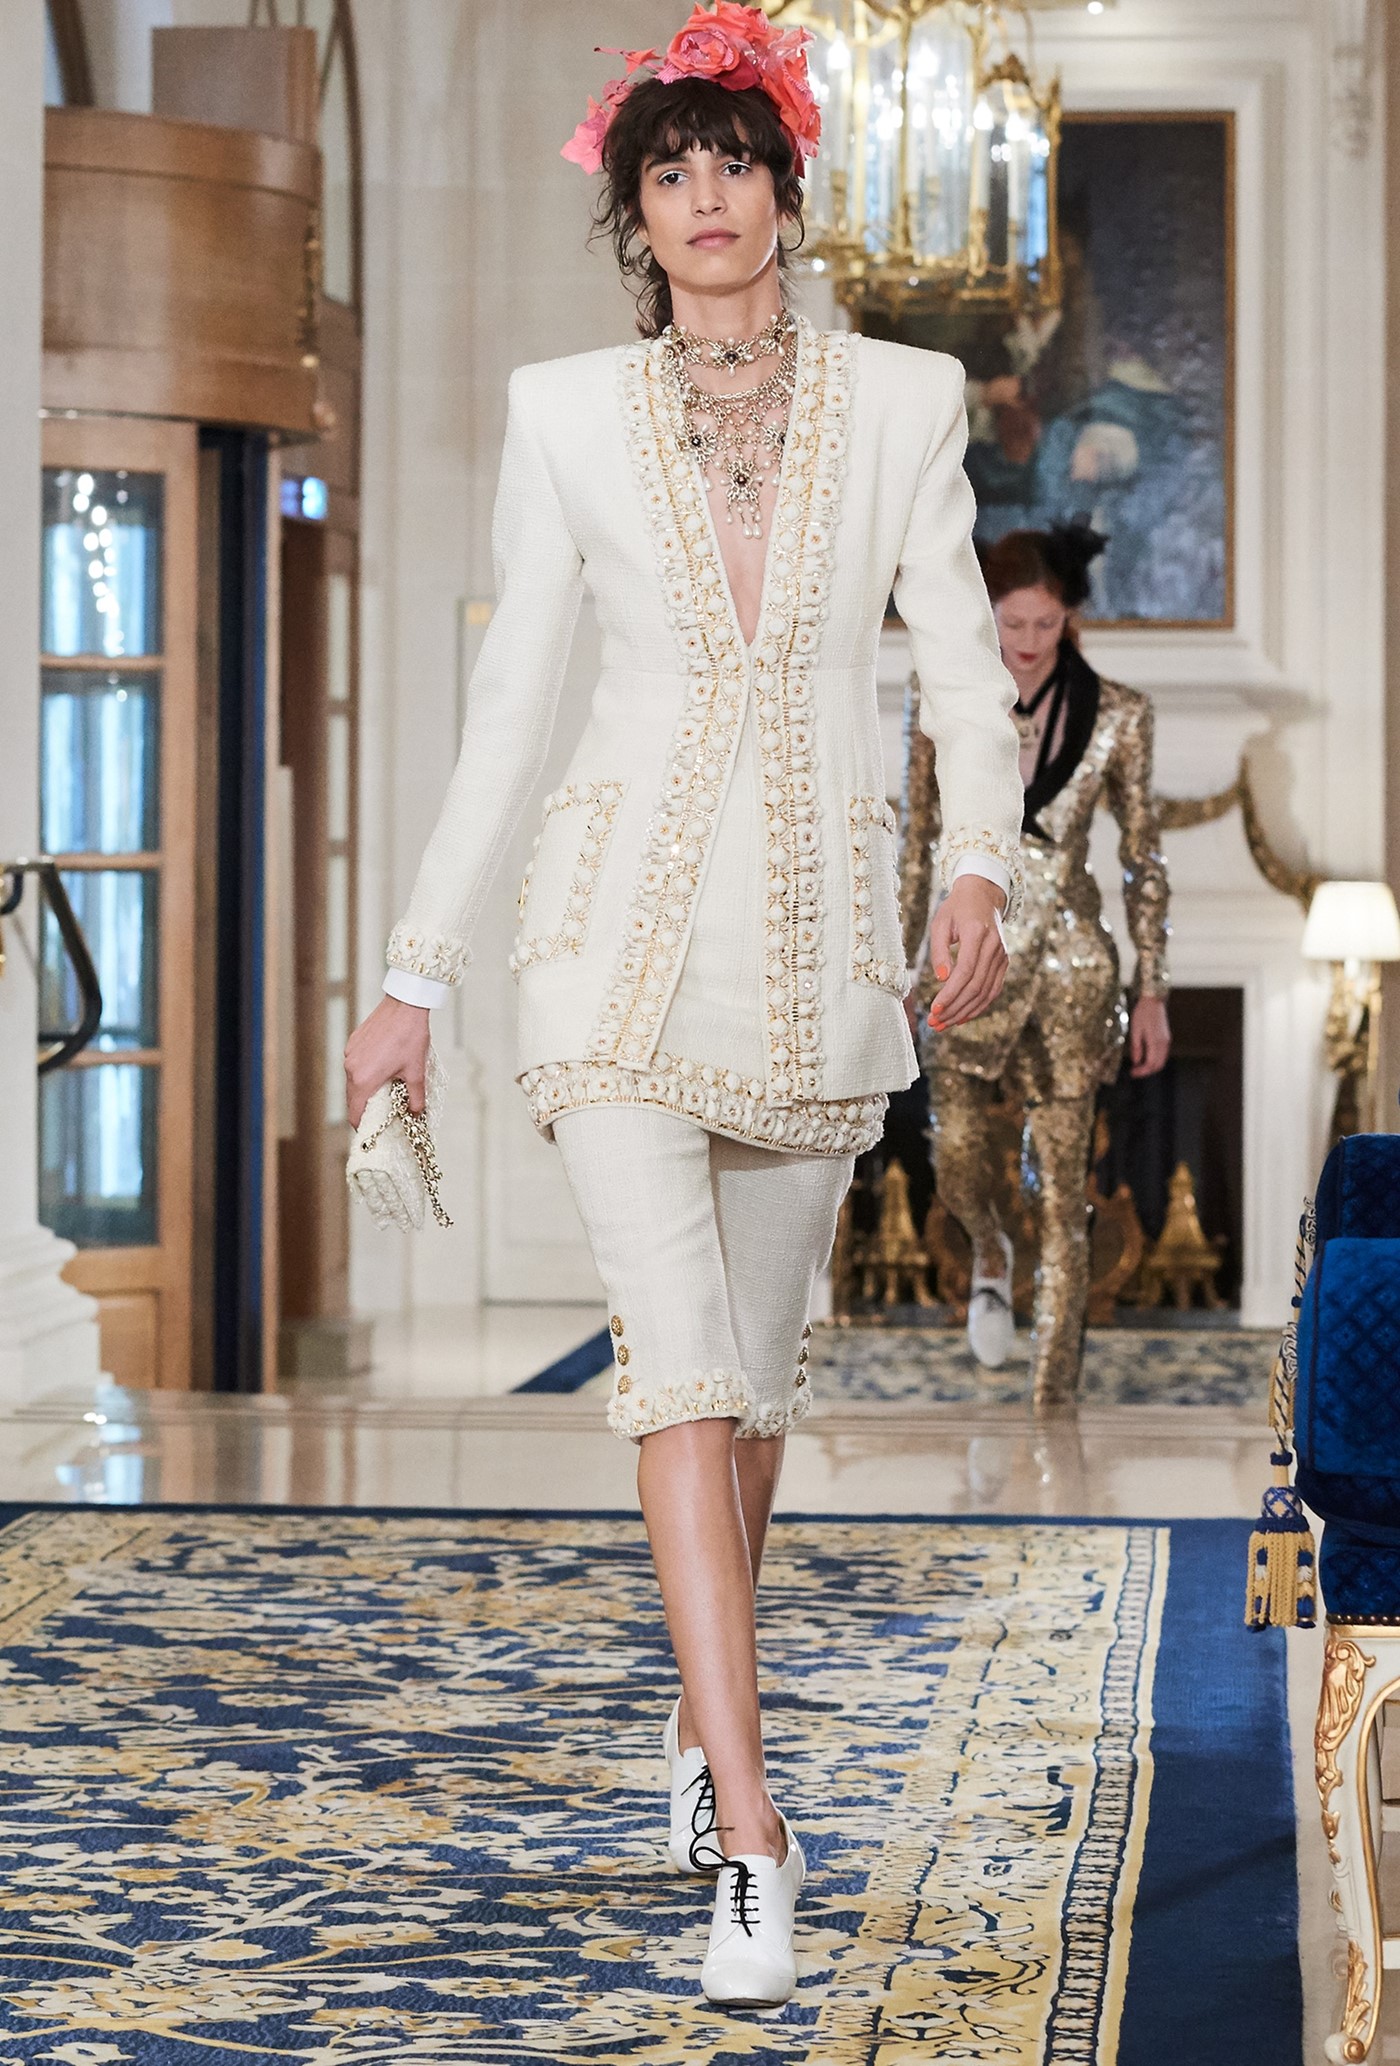 Chanel News, Collections, Fashion Shows, Fashion Week Reviews, and